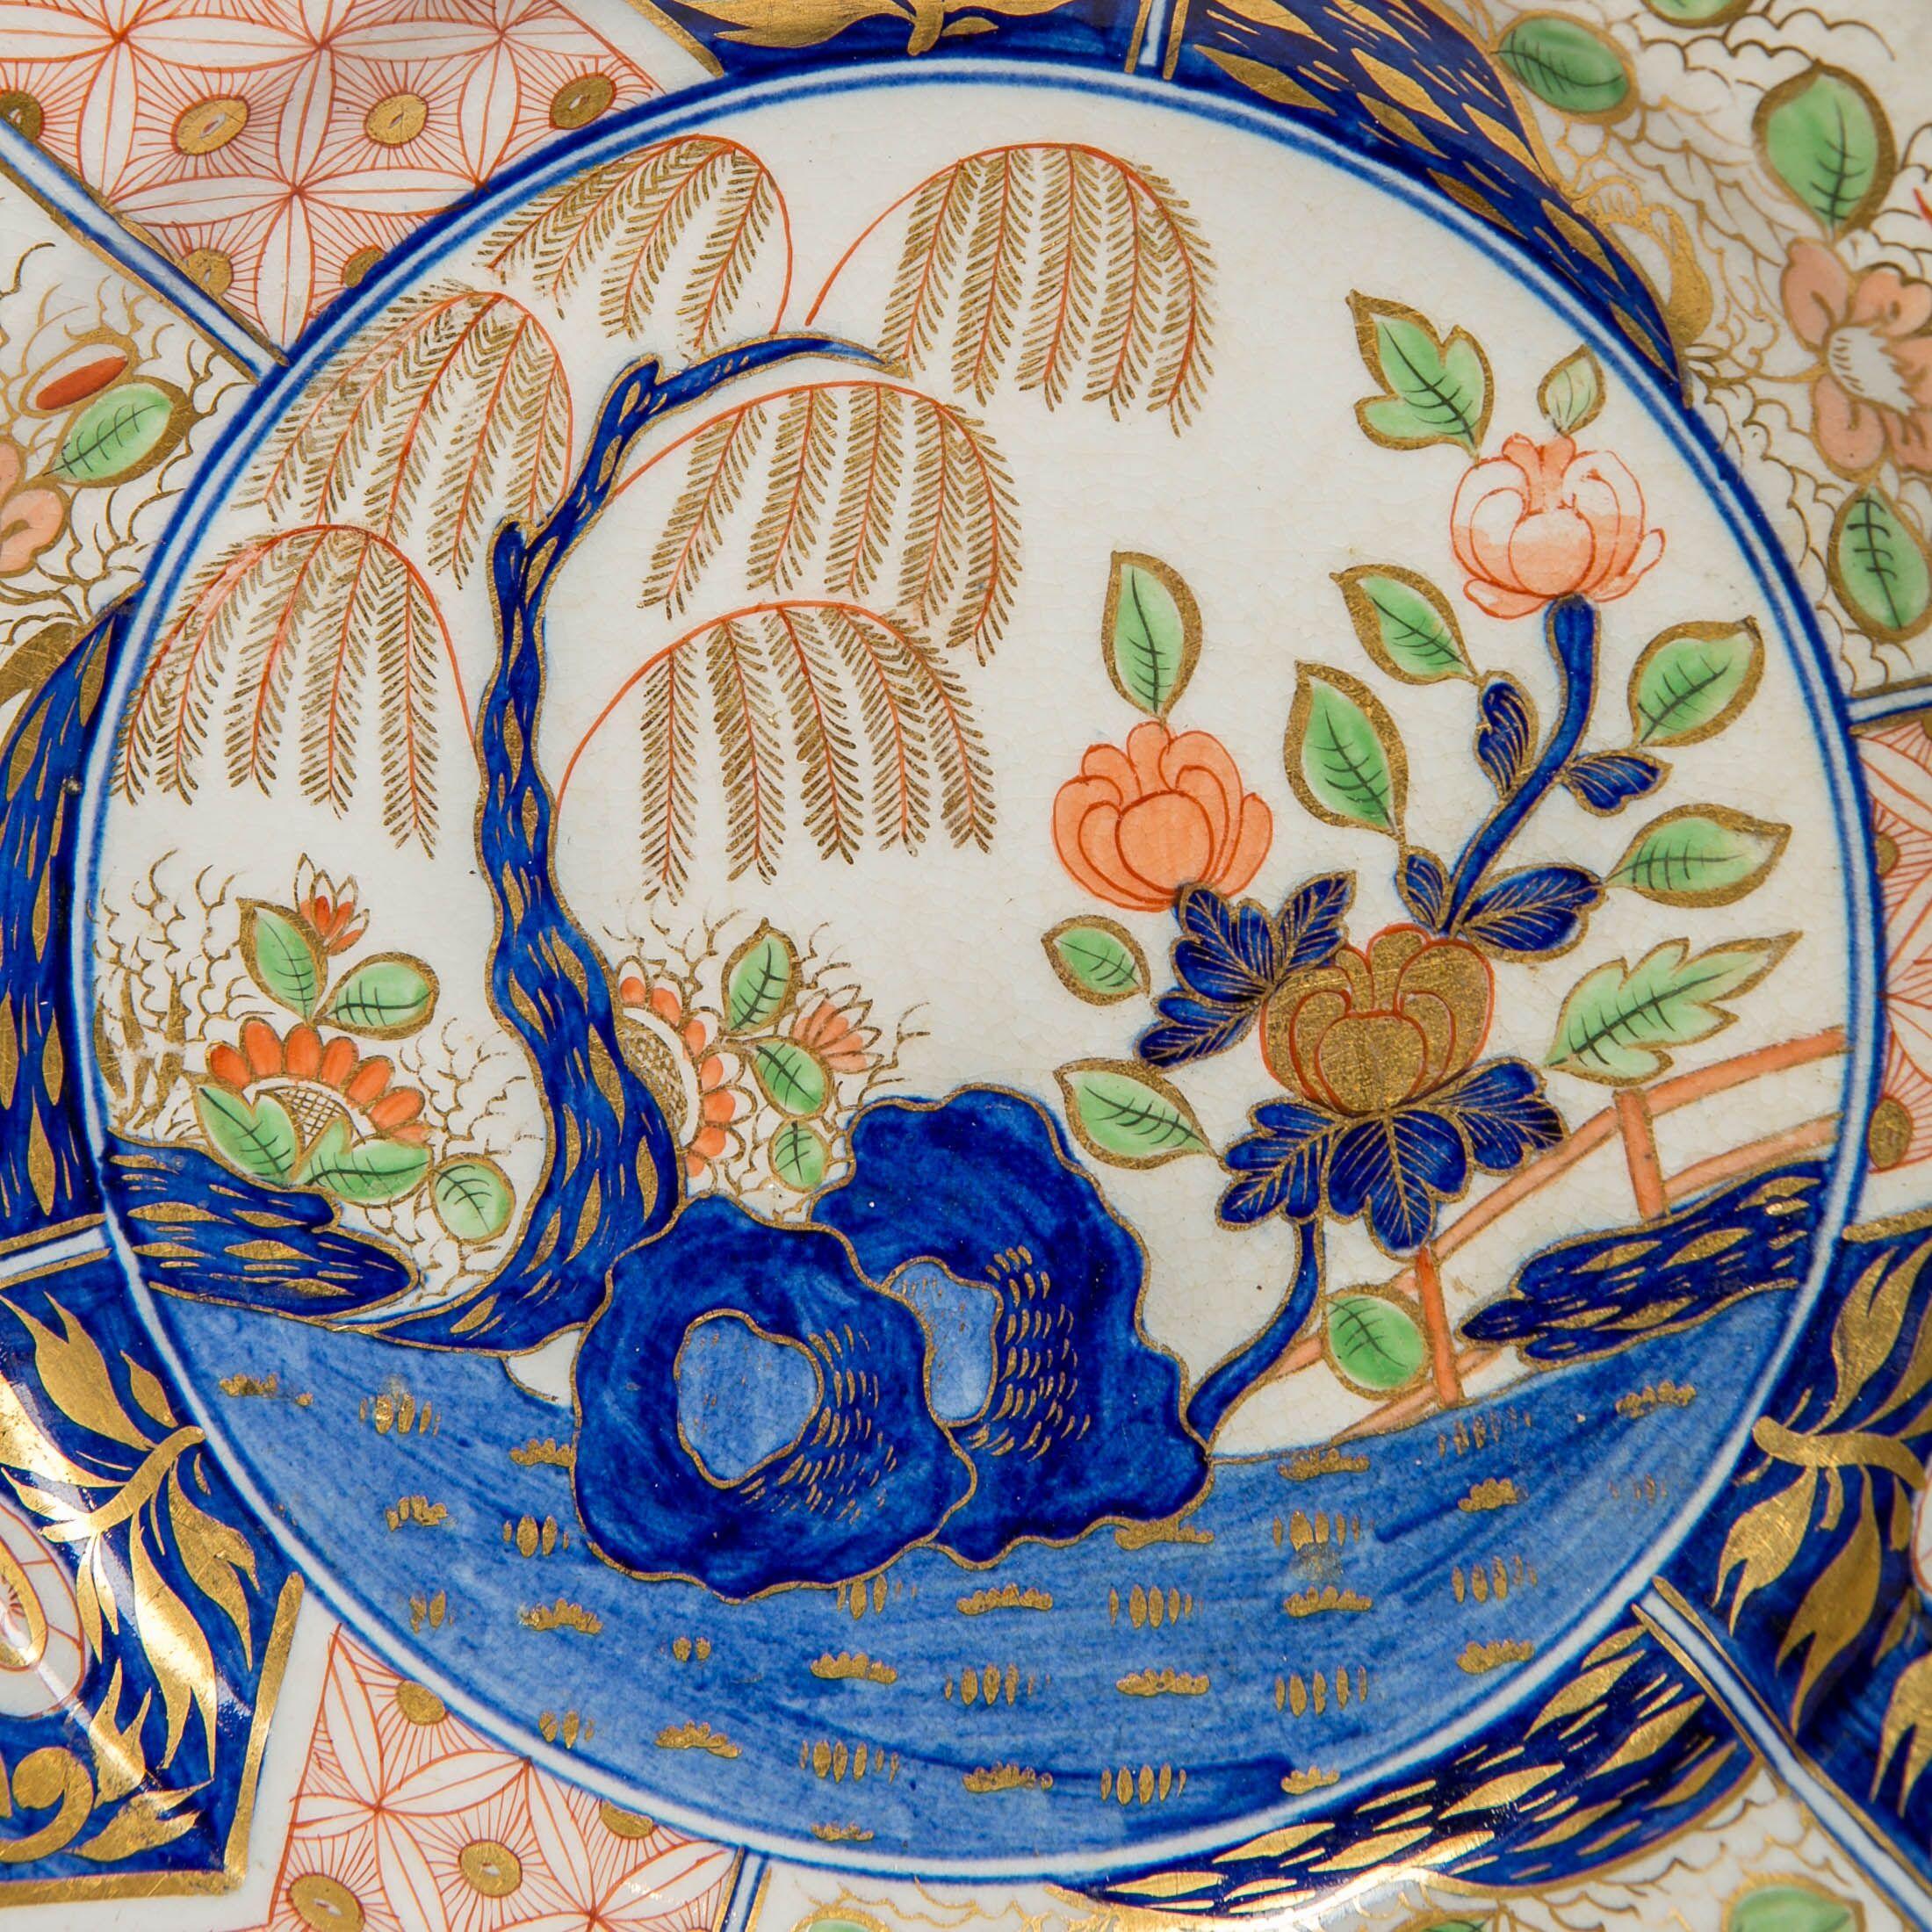 Regency Set of Rock and Tree-Pattern Dinner Plates Made in England, circa 1820